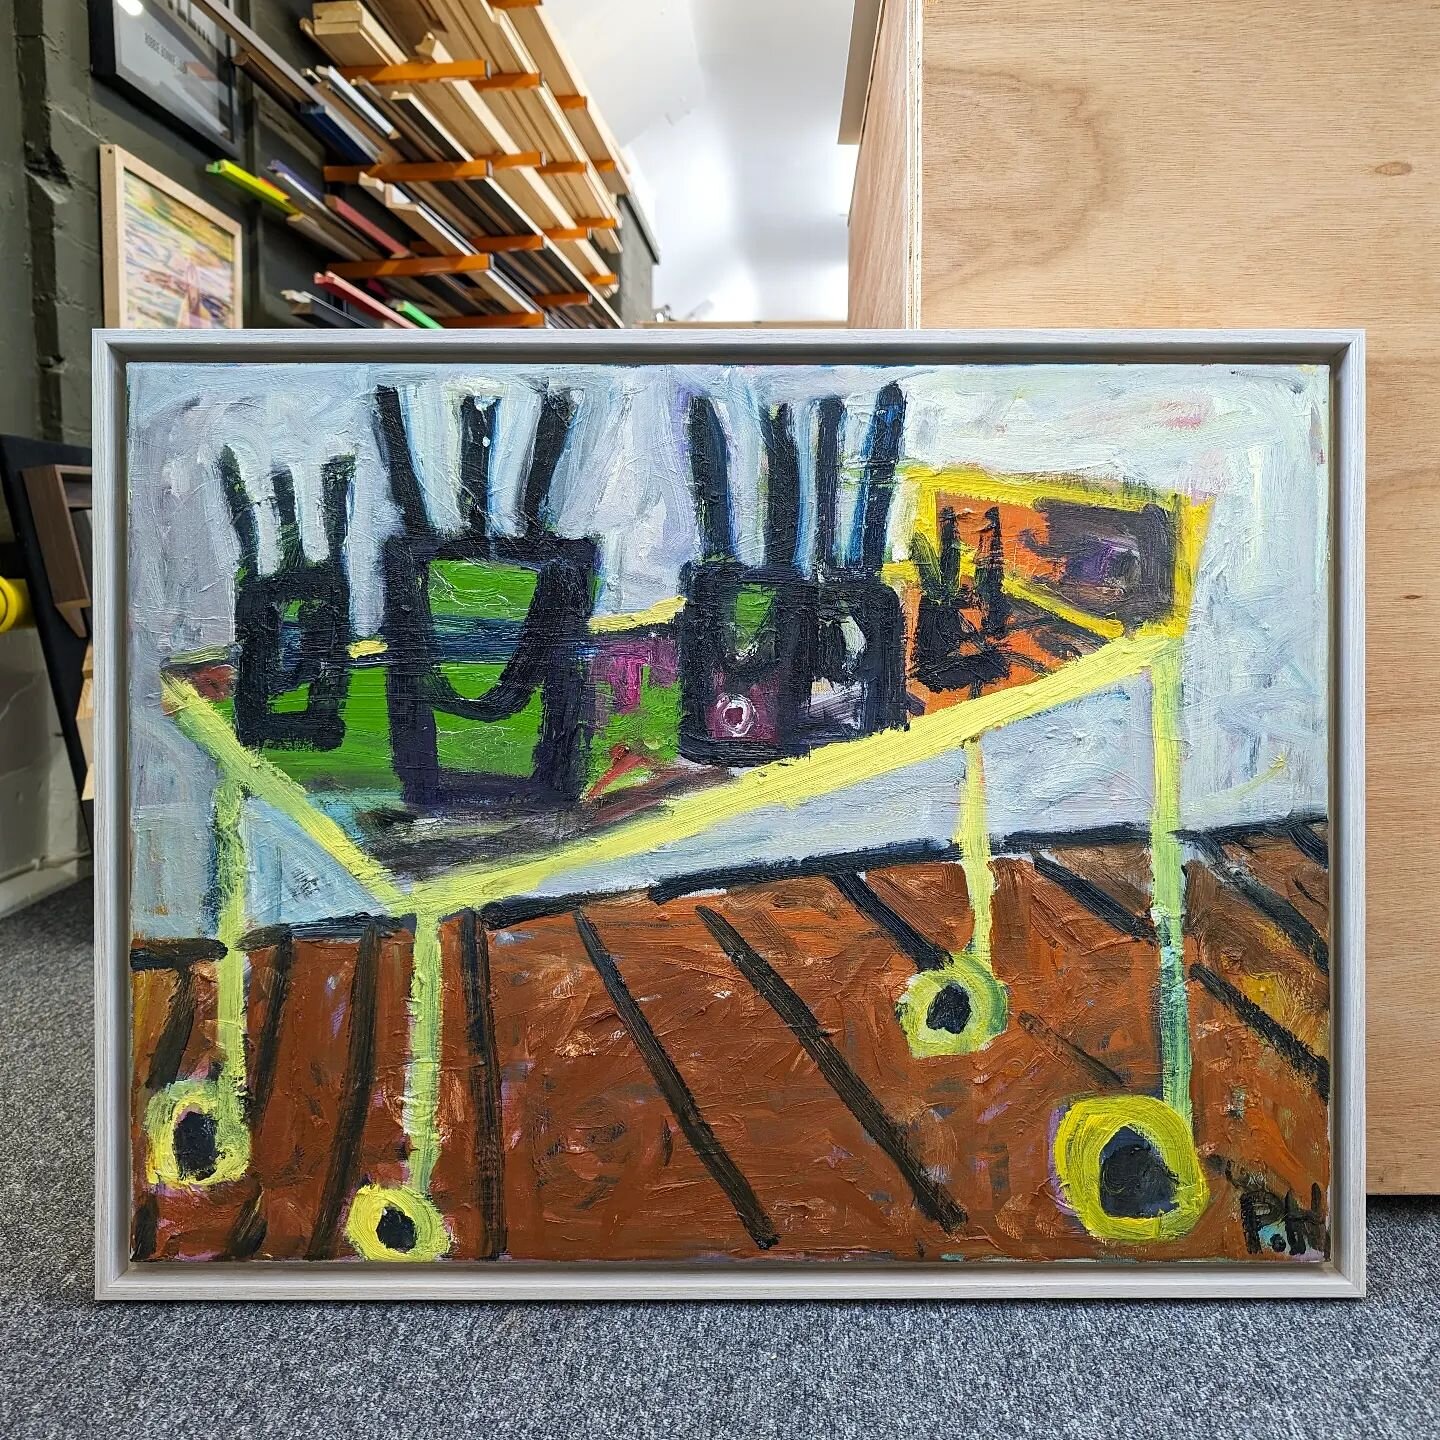 Nice to see this Paul Housley in for framing last week. This painting has a new Sheffield home after Paul's exhibition hosted by @thegoodshippresents at @yartspace.
.
Framed in a white washed oak veneer tray frame. 
.
#pictureframing #sheffieldpictur